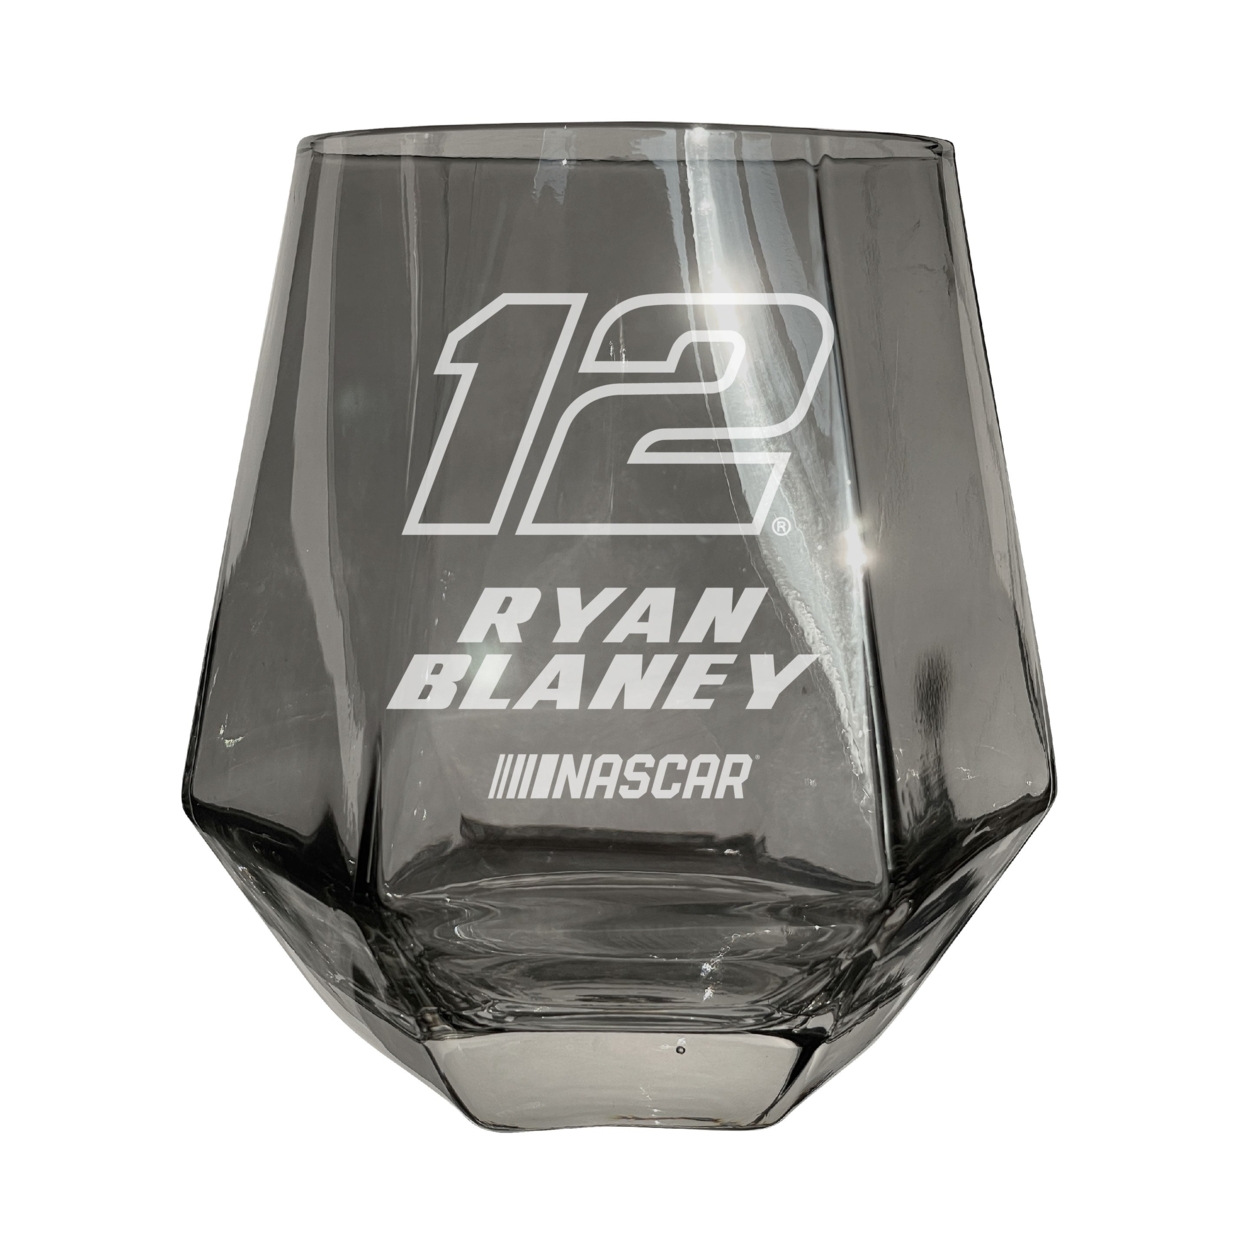 #12 Ryan Blaney Officially Licensed 10 Oz Engraved Diamond Wine Glass - Iridescent, 2-Pack